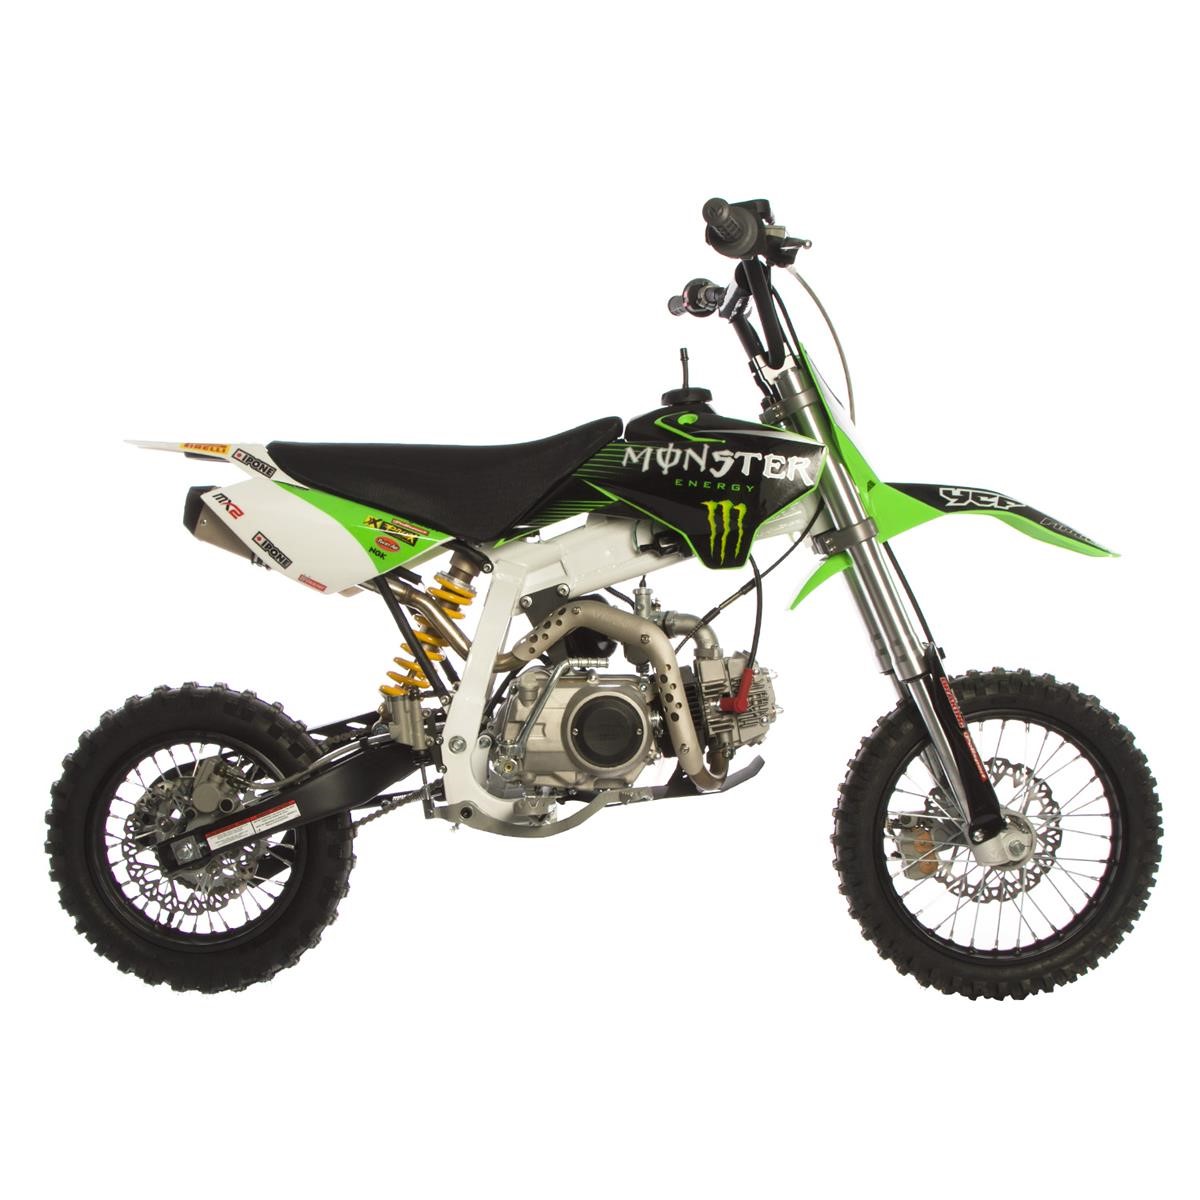 YCF Pitbike Pilot F125 Monster Edition Modell 2015